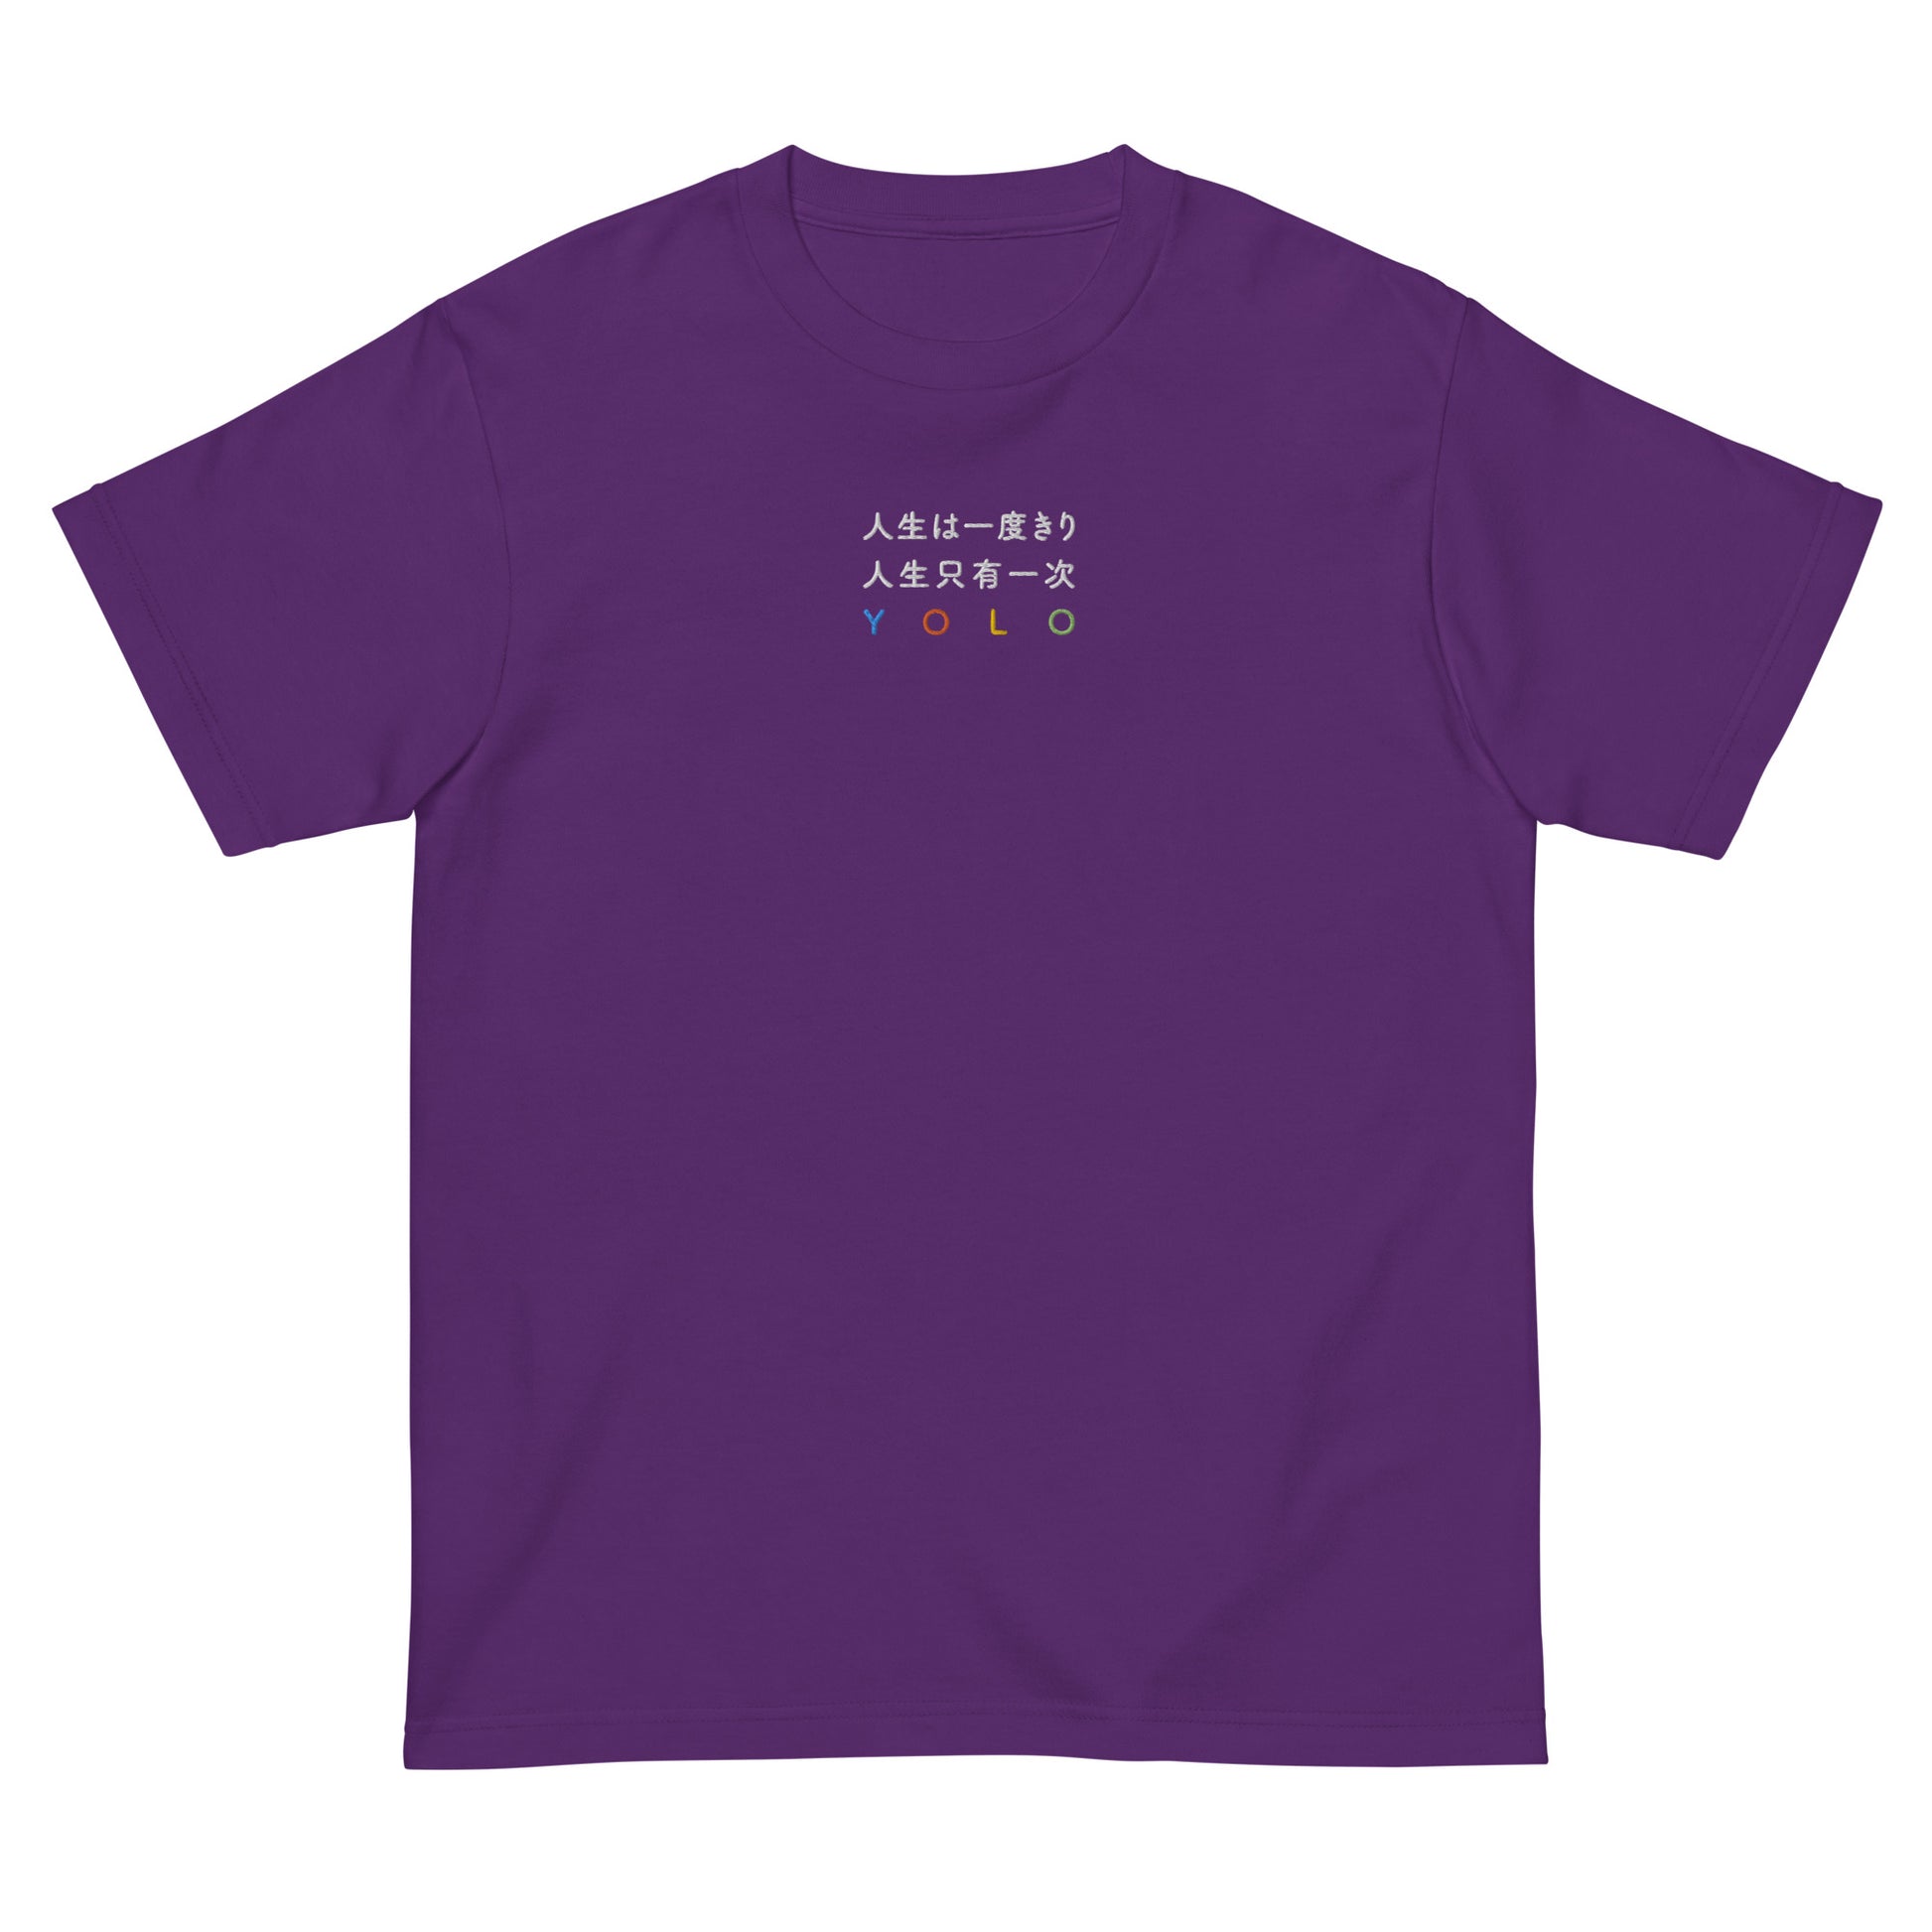 Purple High Quality Tee - Front Design with an White, Light Blue, Orange, Yellow, Light Green Embroidery "YOLO" in Japanese,Chinese and English